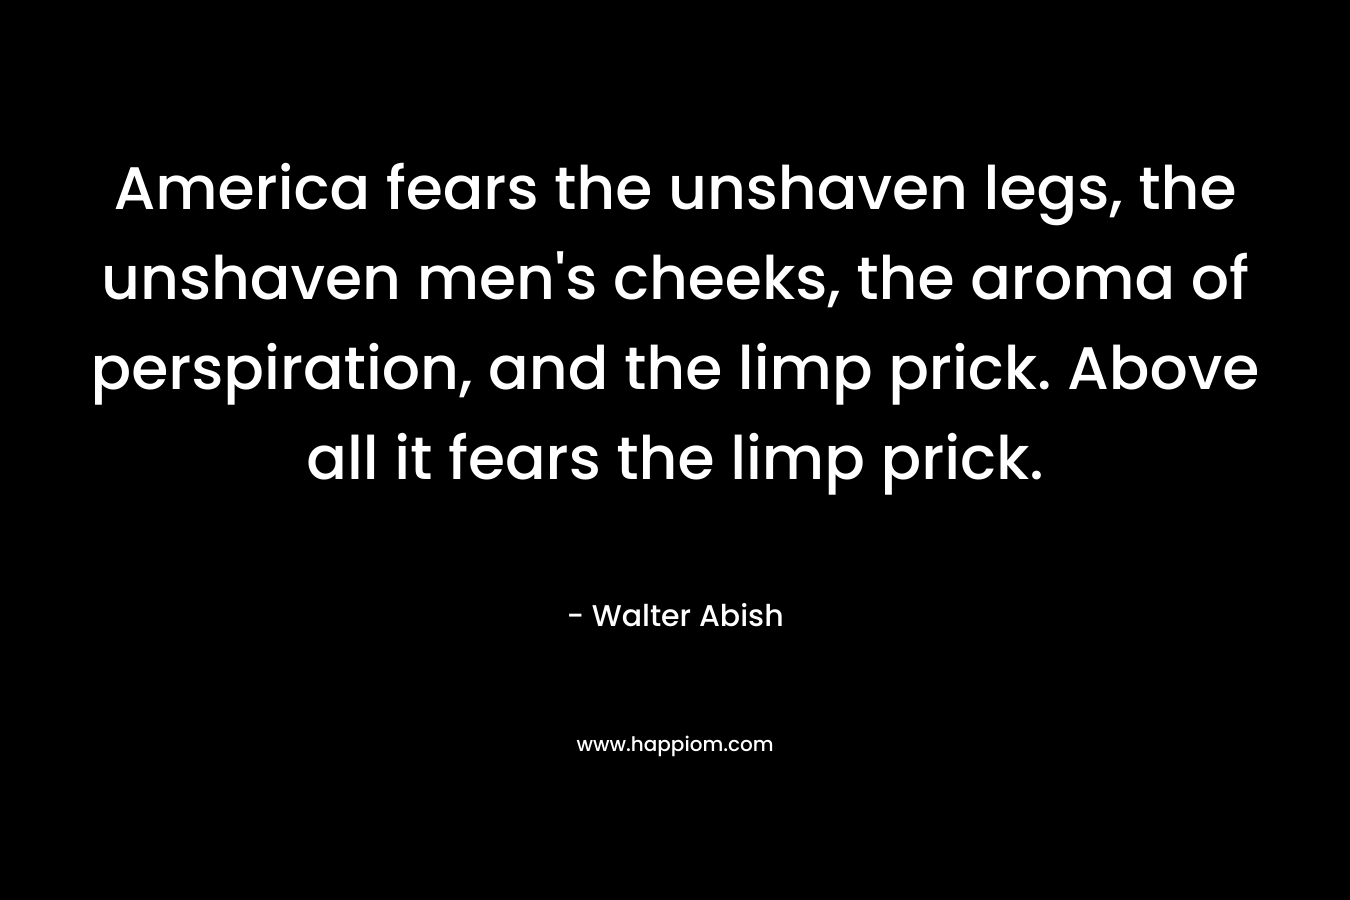 America fears the unshaven legs, the unshaven men’s cheeks, the aroma of perspiration, and the limp prick. Above all it fears the limp prick. – Walter Abish